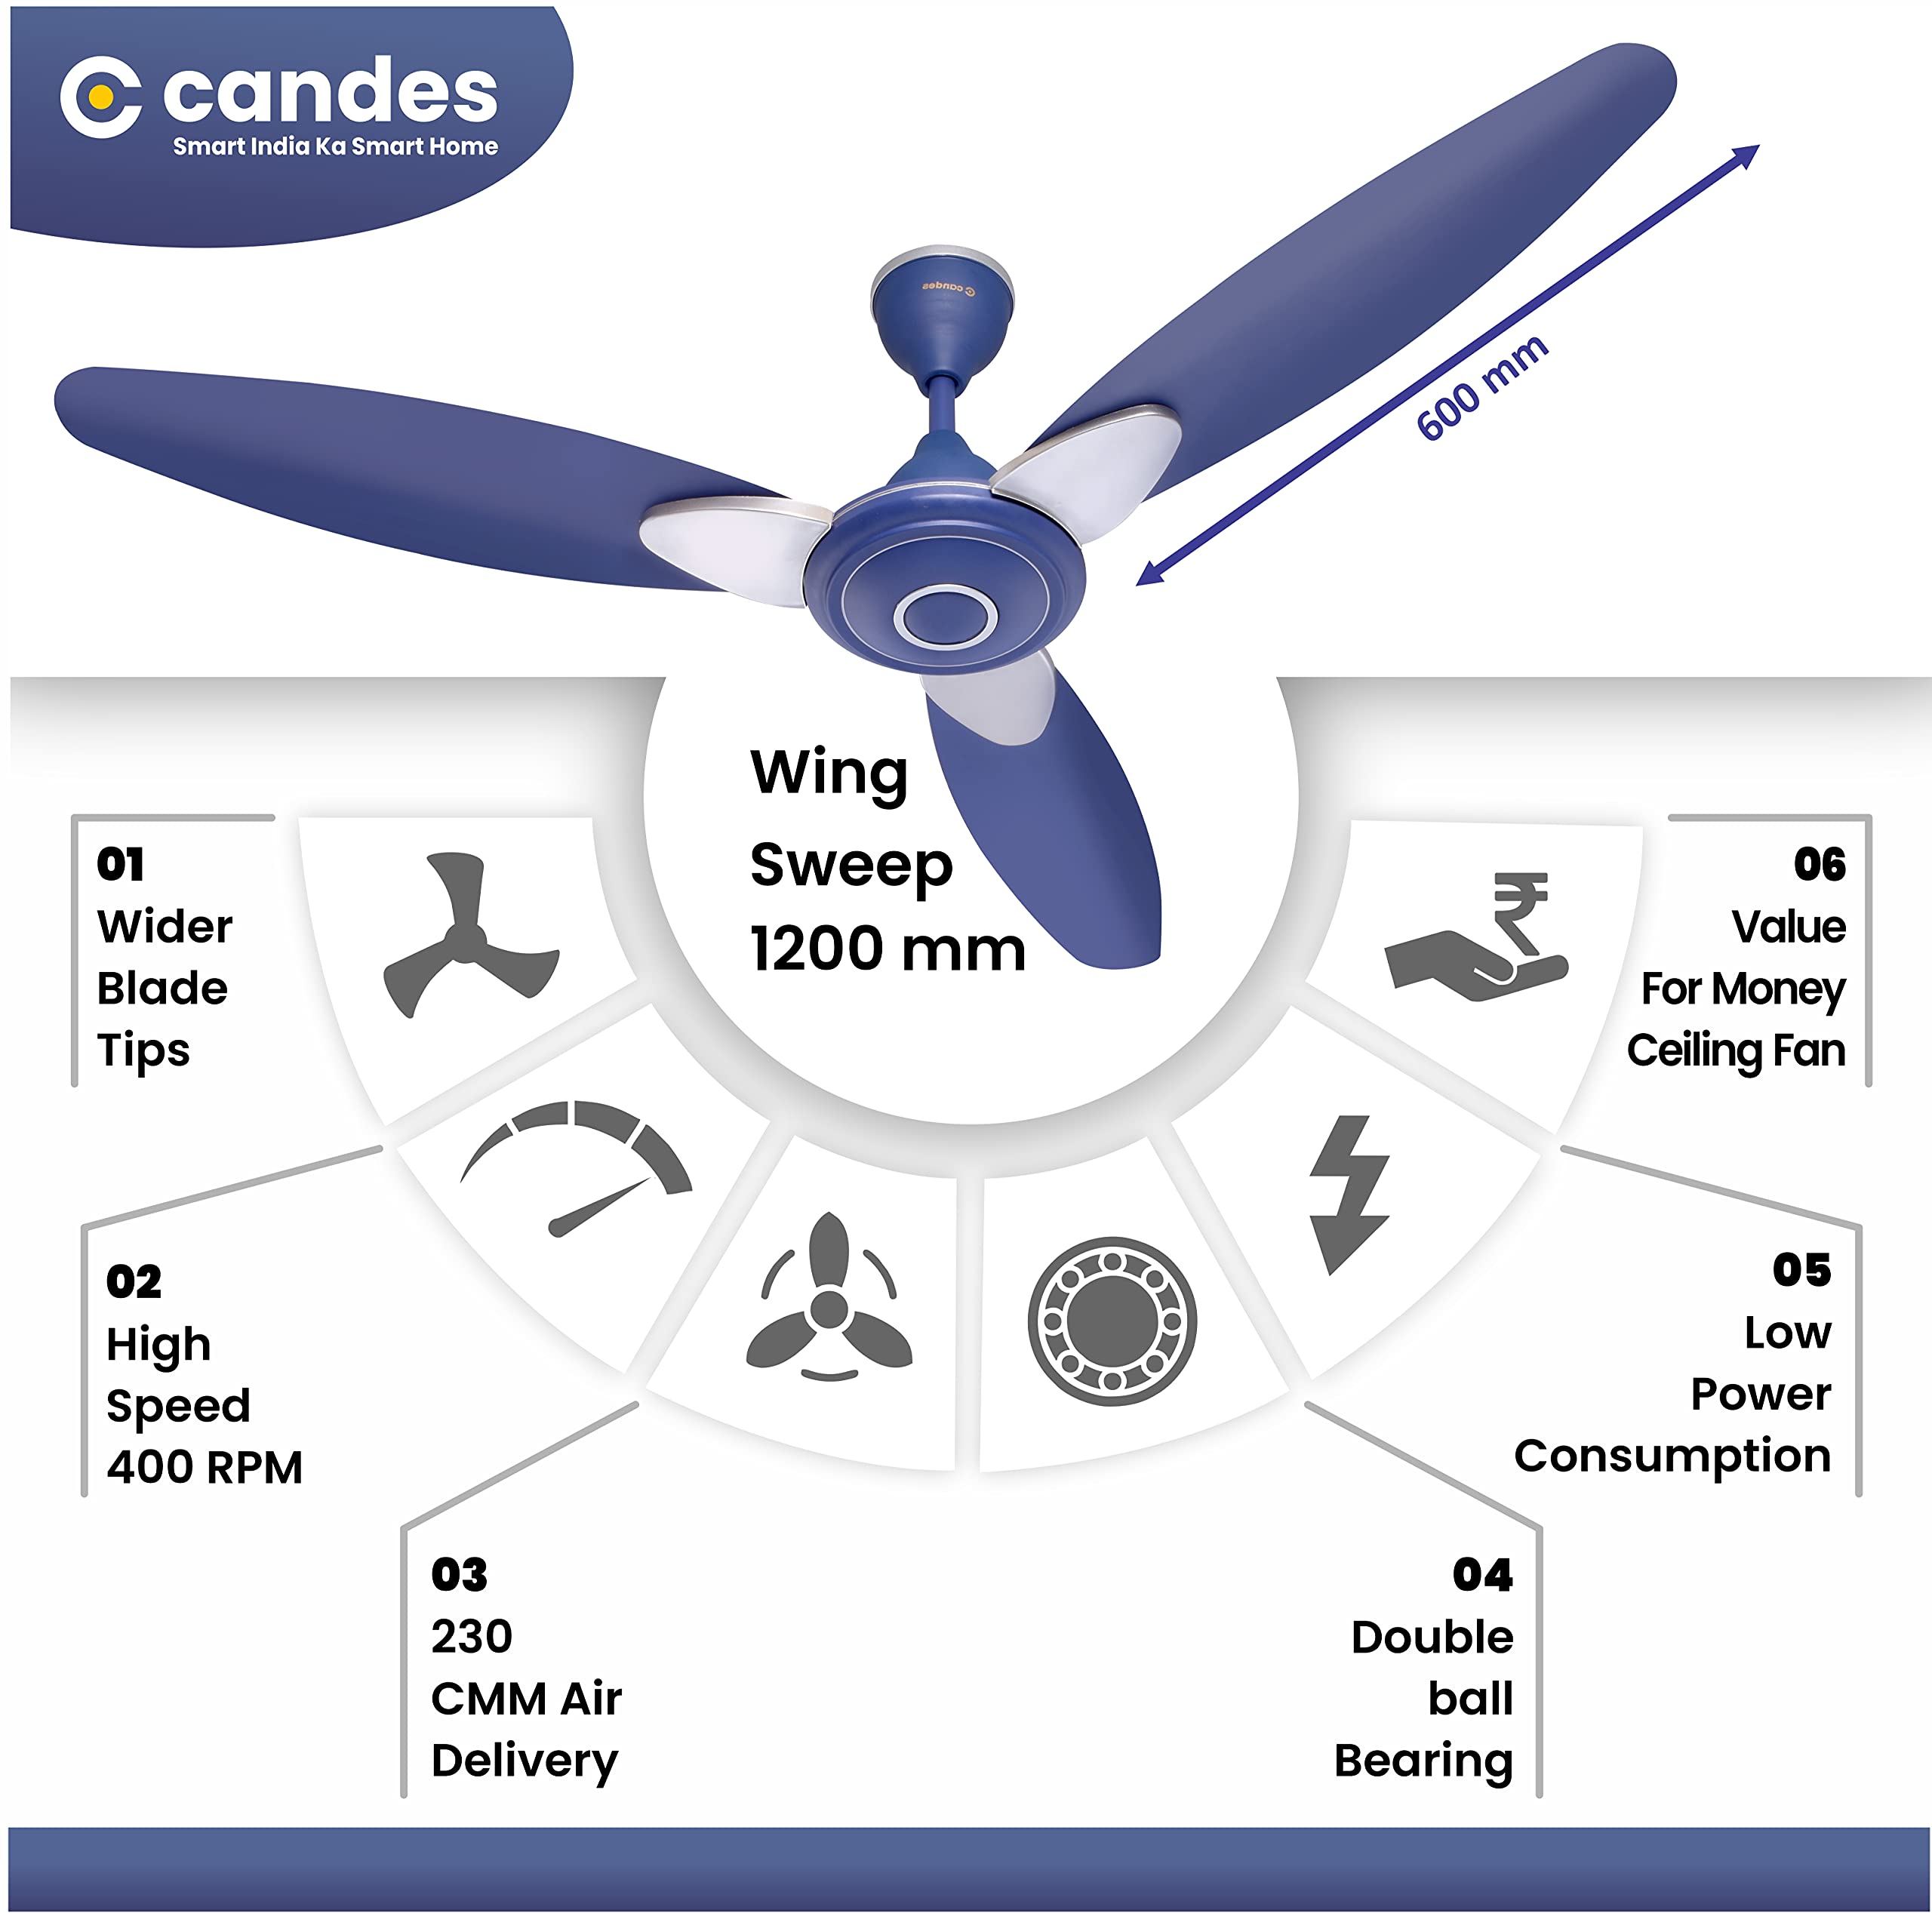 Candes Florence 1200mm/48Inch High Speed Decorative 5 Star Rated Ceiling Fan 400 RPM With 2 Yrs Warranty (Smart IOT With Remote) Silver Blue